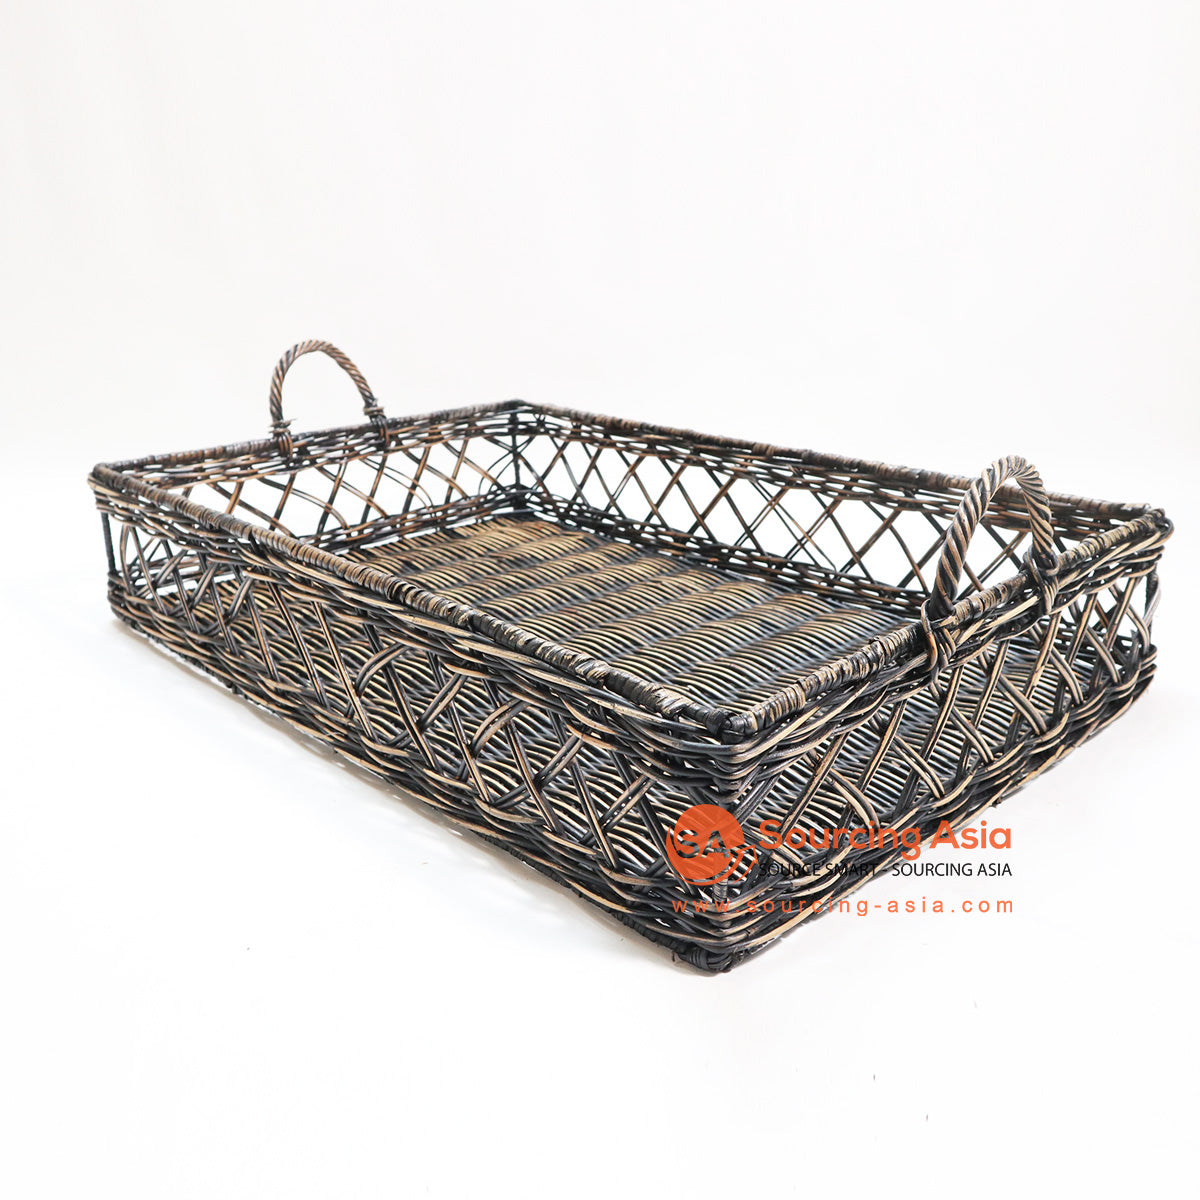 HBSC116 BLACK WASHED ANTIQUE RATTAN TRAY WITH HANDLE